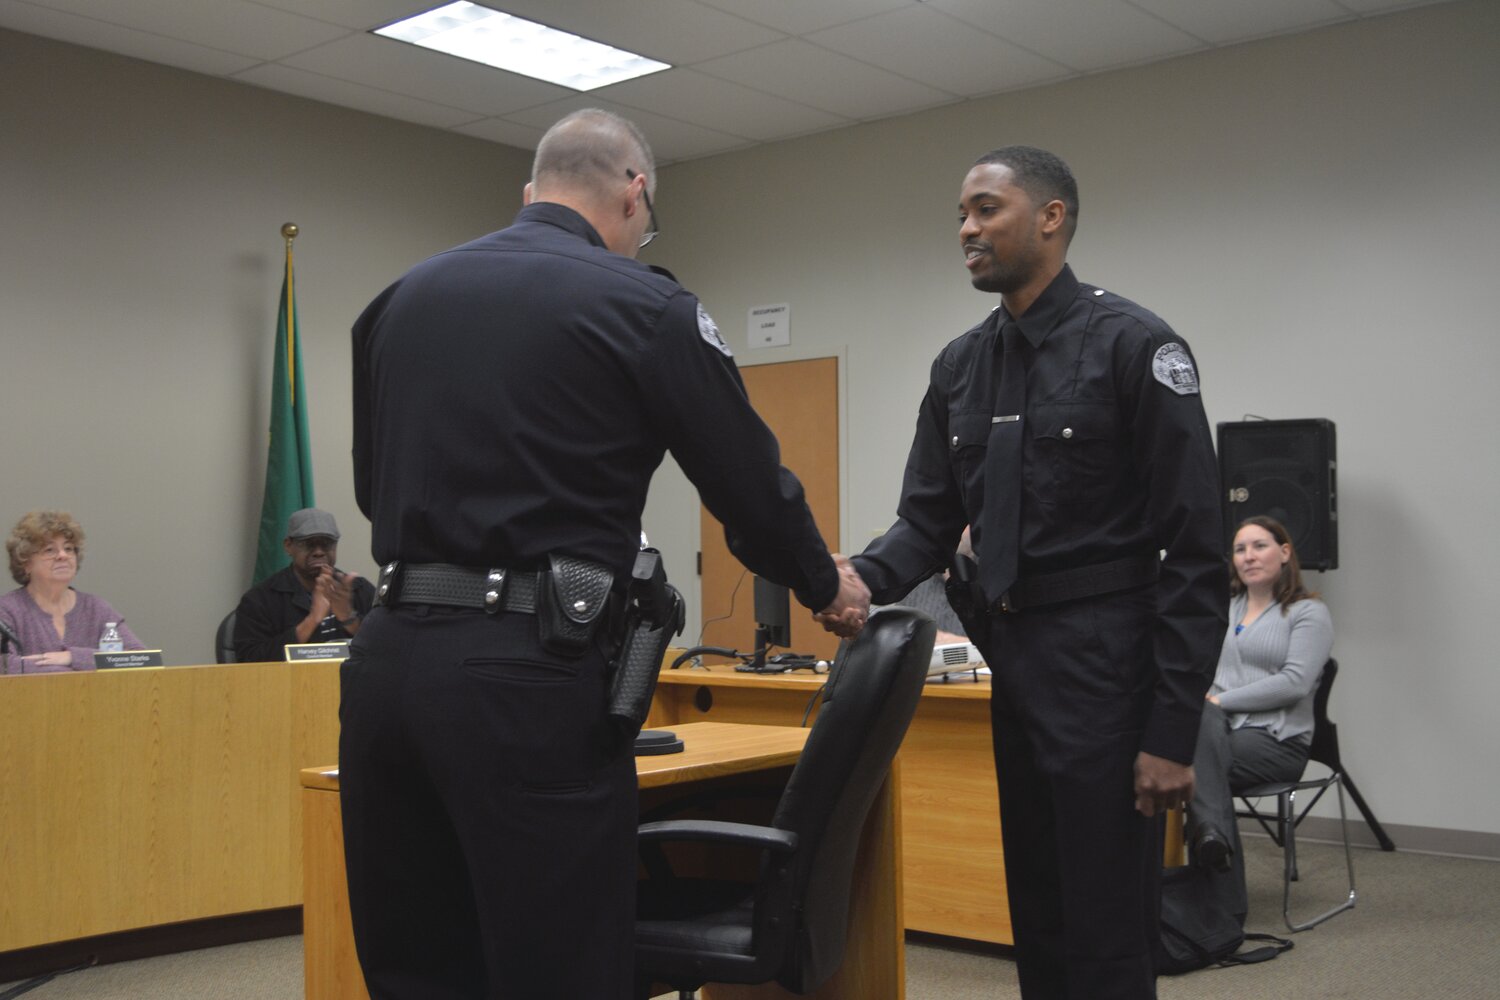 Roy officer Drew Pearson, right, is sworn in by Police Chief Paul Antista at an Oct. 23 City Council meeting.